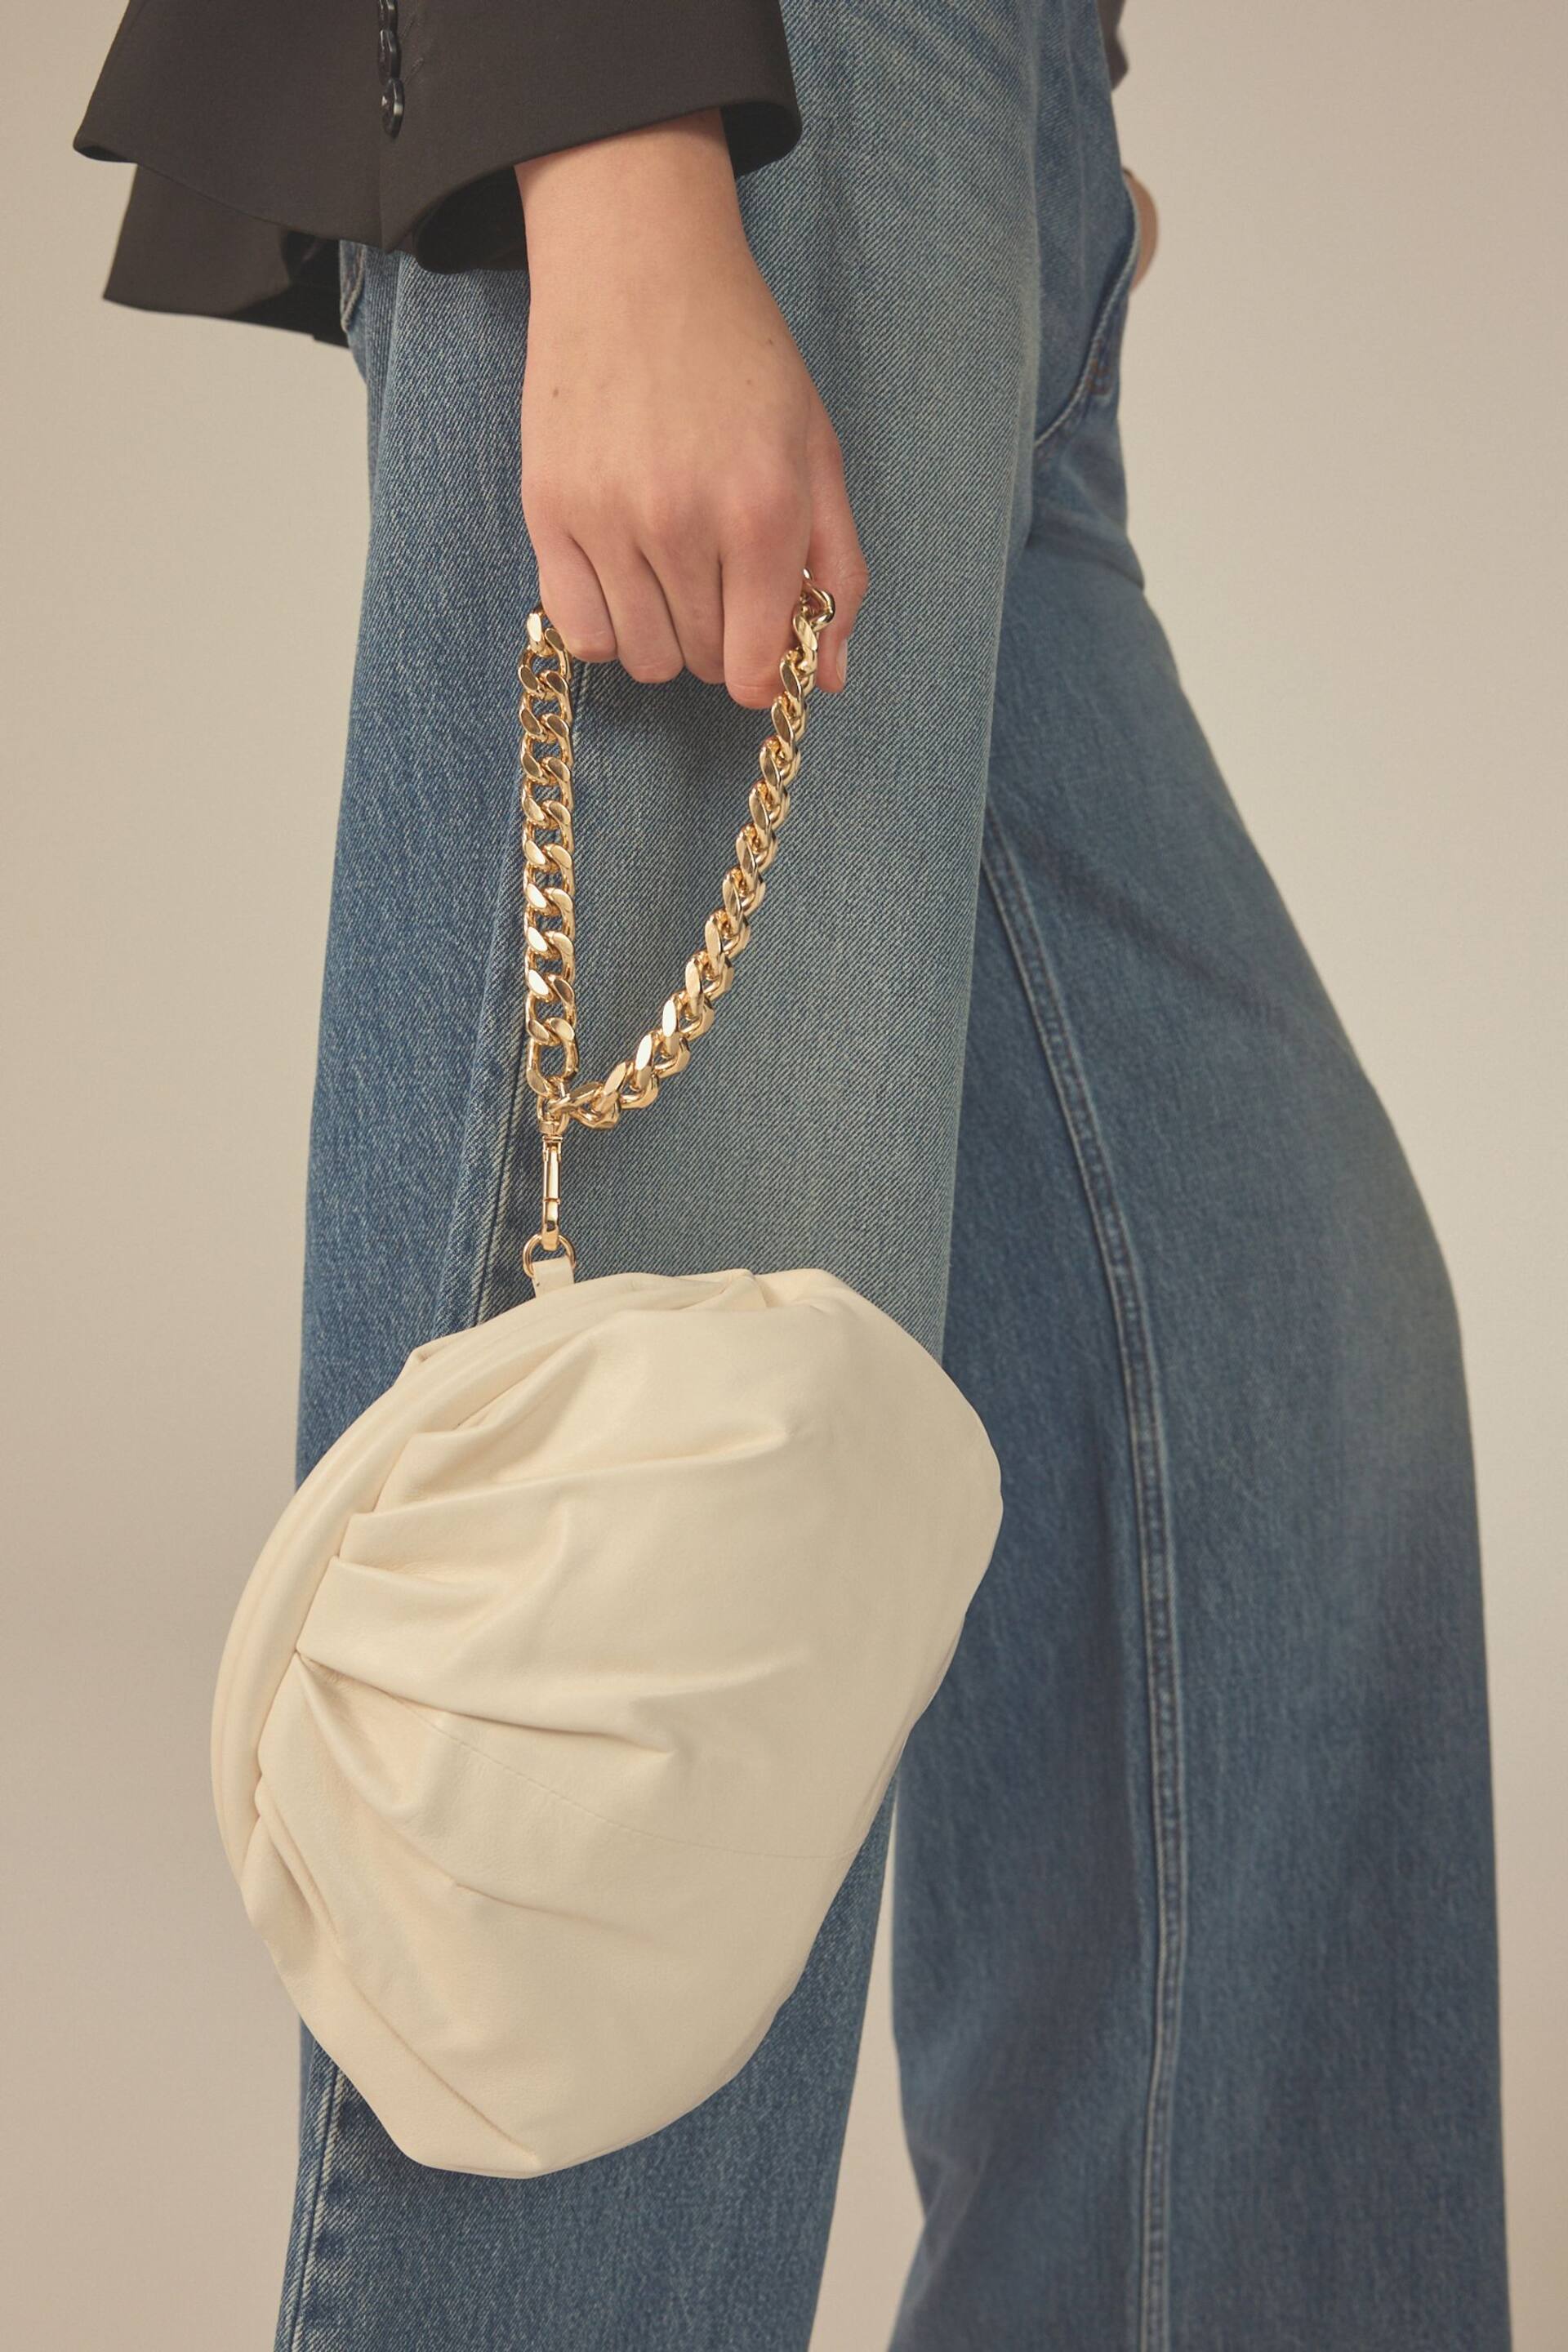 White Leather Snap Clutch Bag - Image 1 of 7